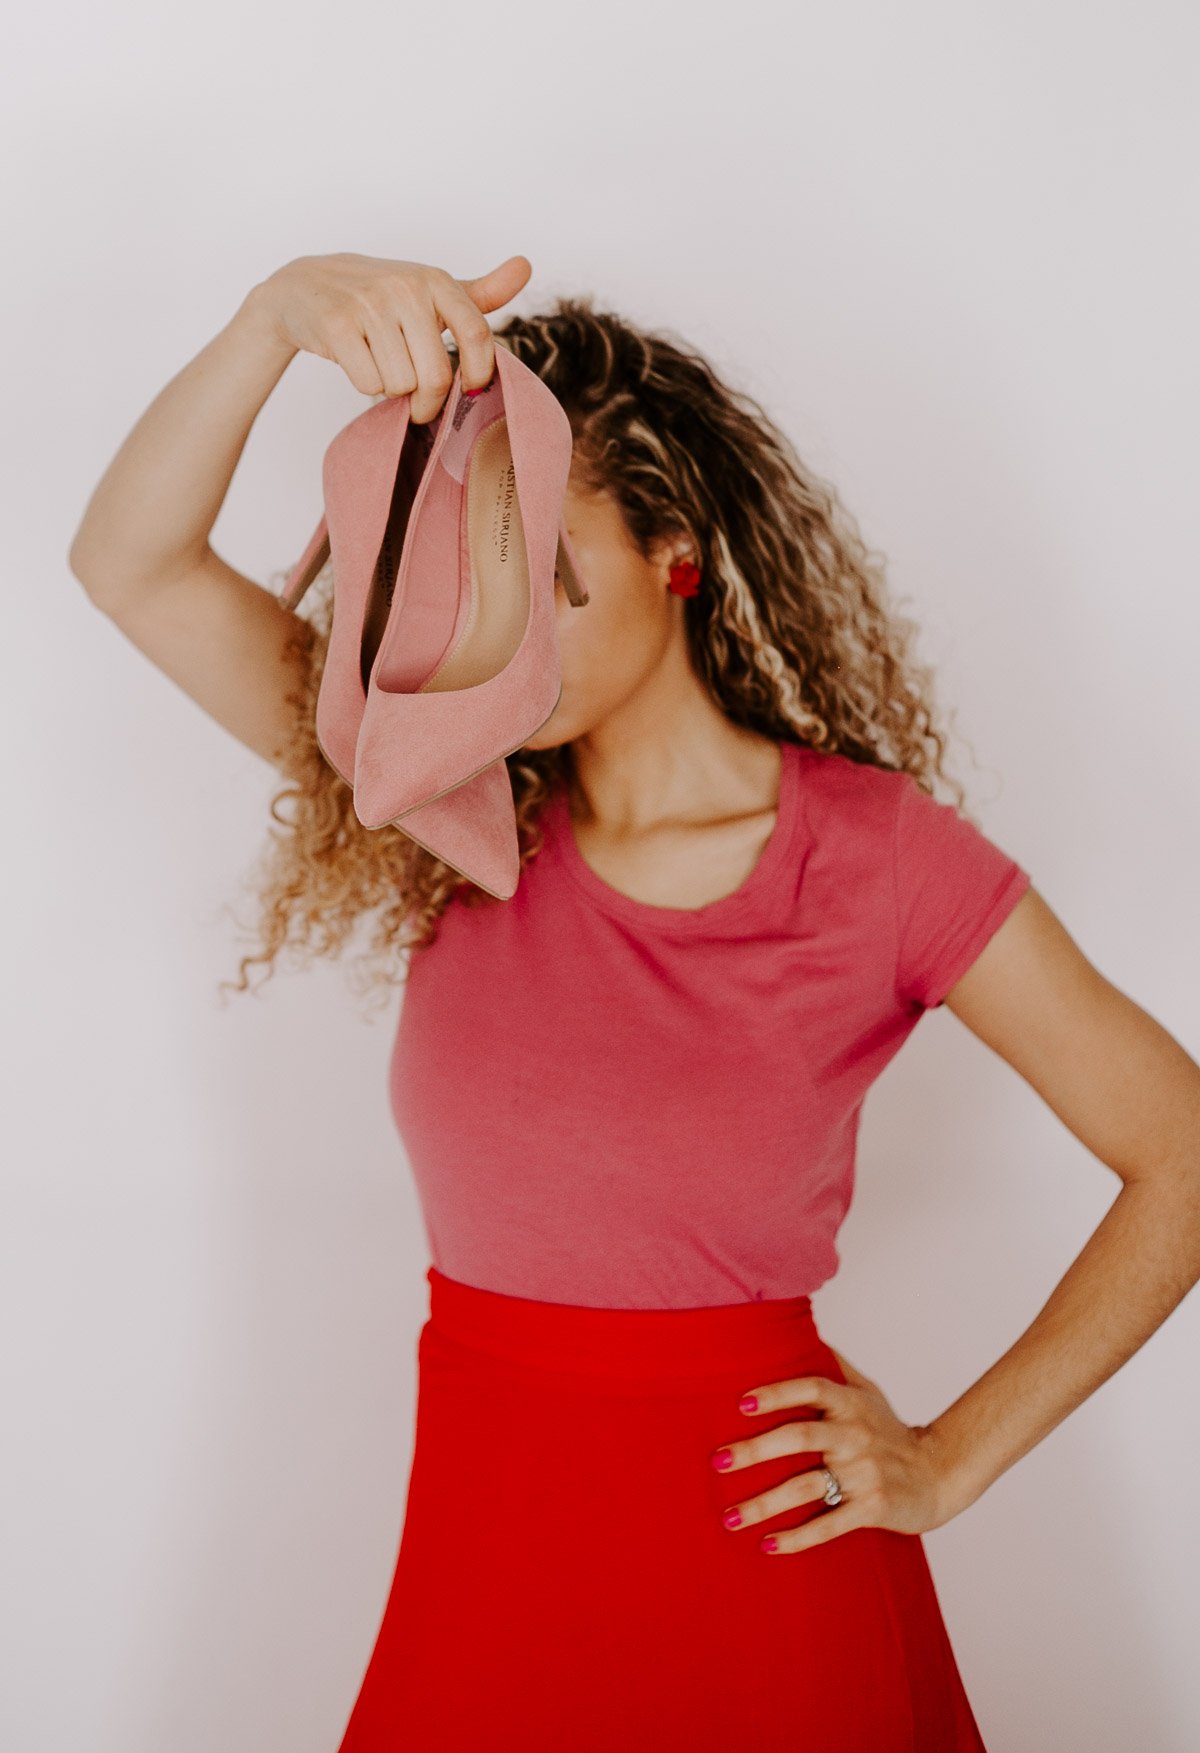 Red and pink outfits that are perfect for Valentine's Day or wearing them for spring. These colors together are great spring outfit ideas too!